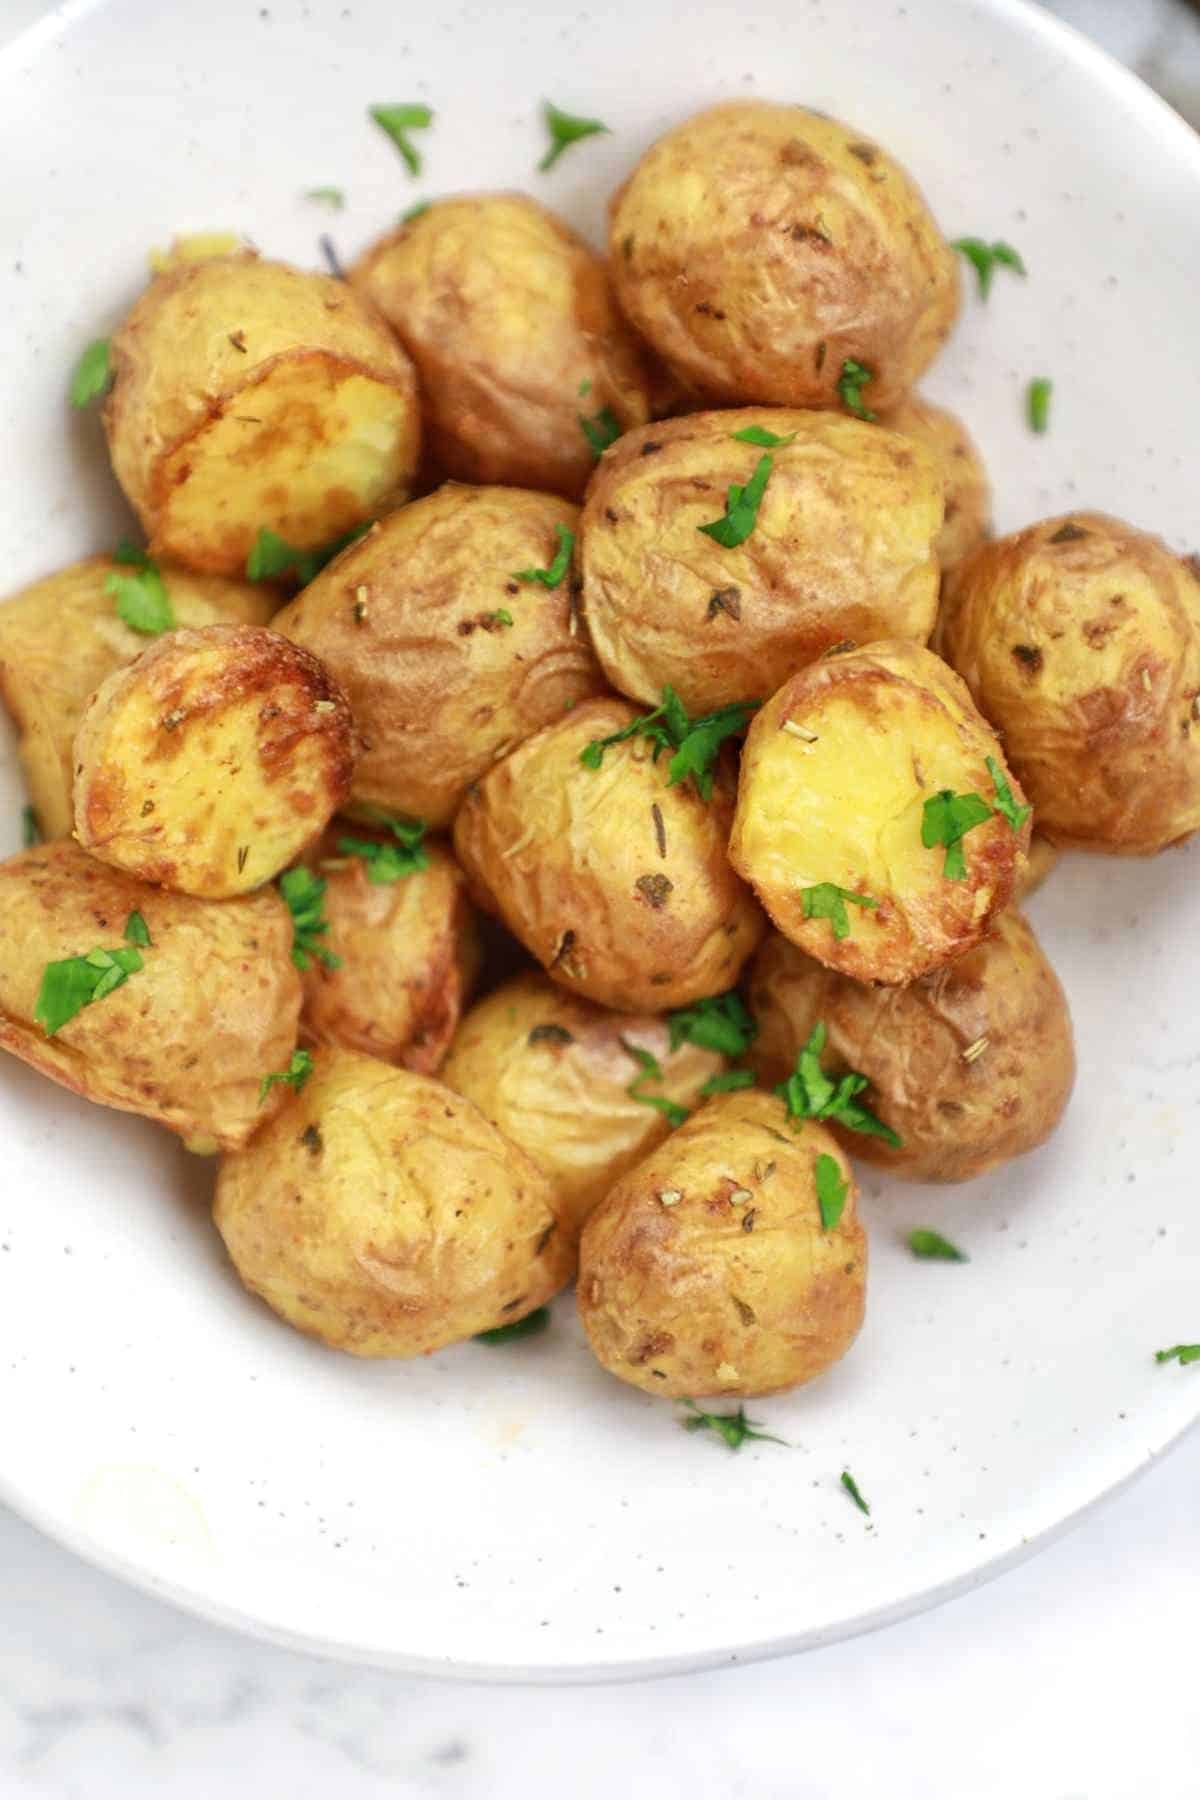 roasted baby potatoes served in a bowl.